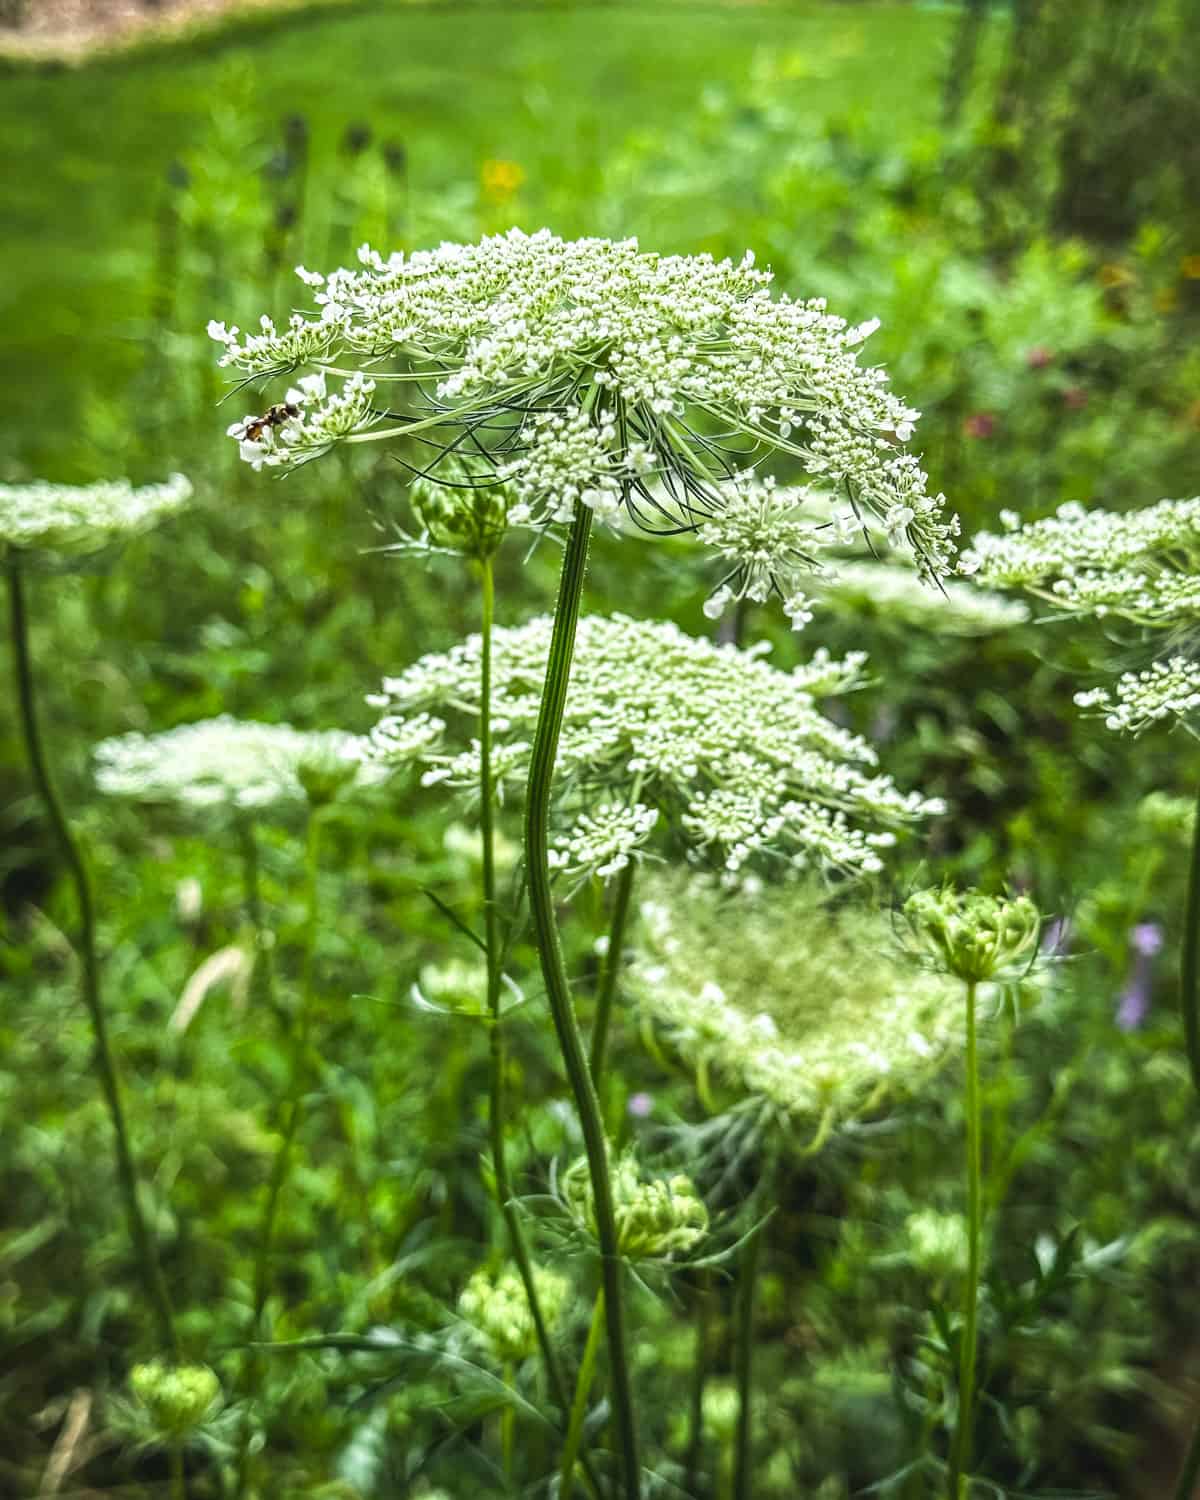 Foraging Queen Anne's Lace: Identification, Look-alikes, and Uses